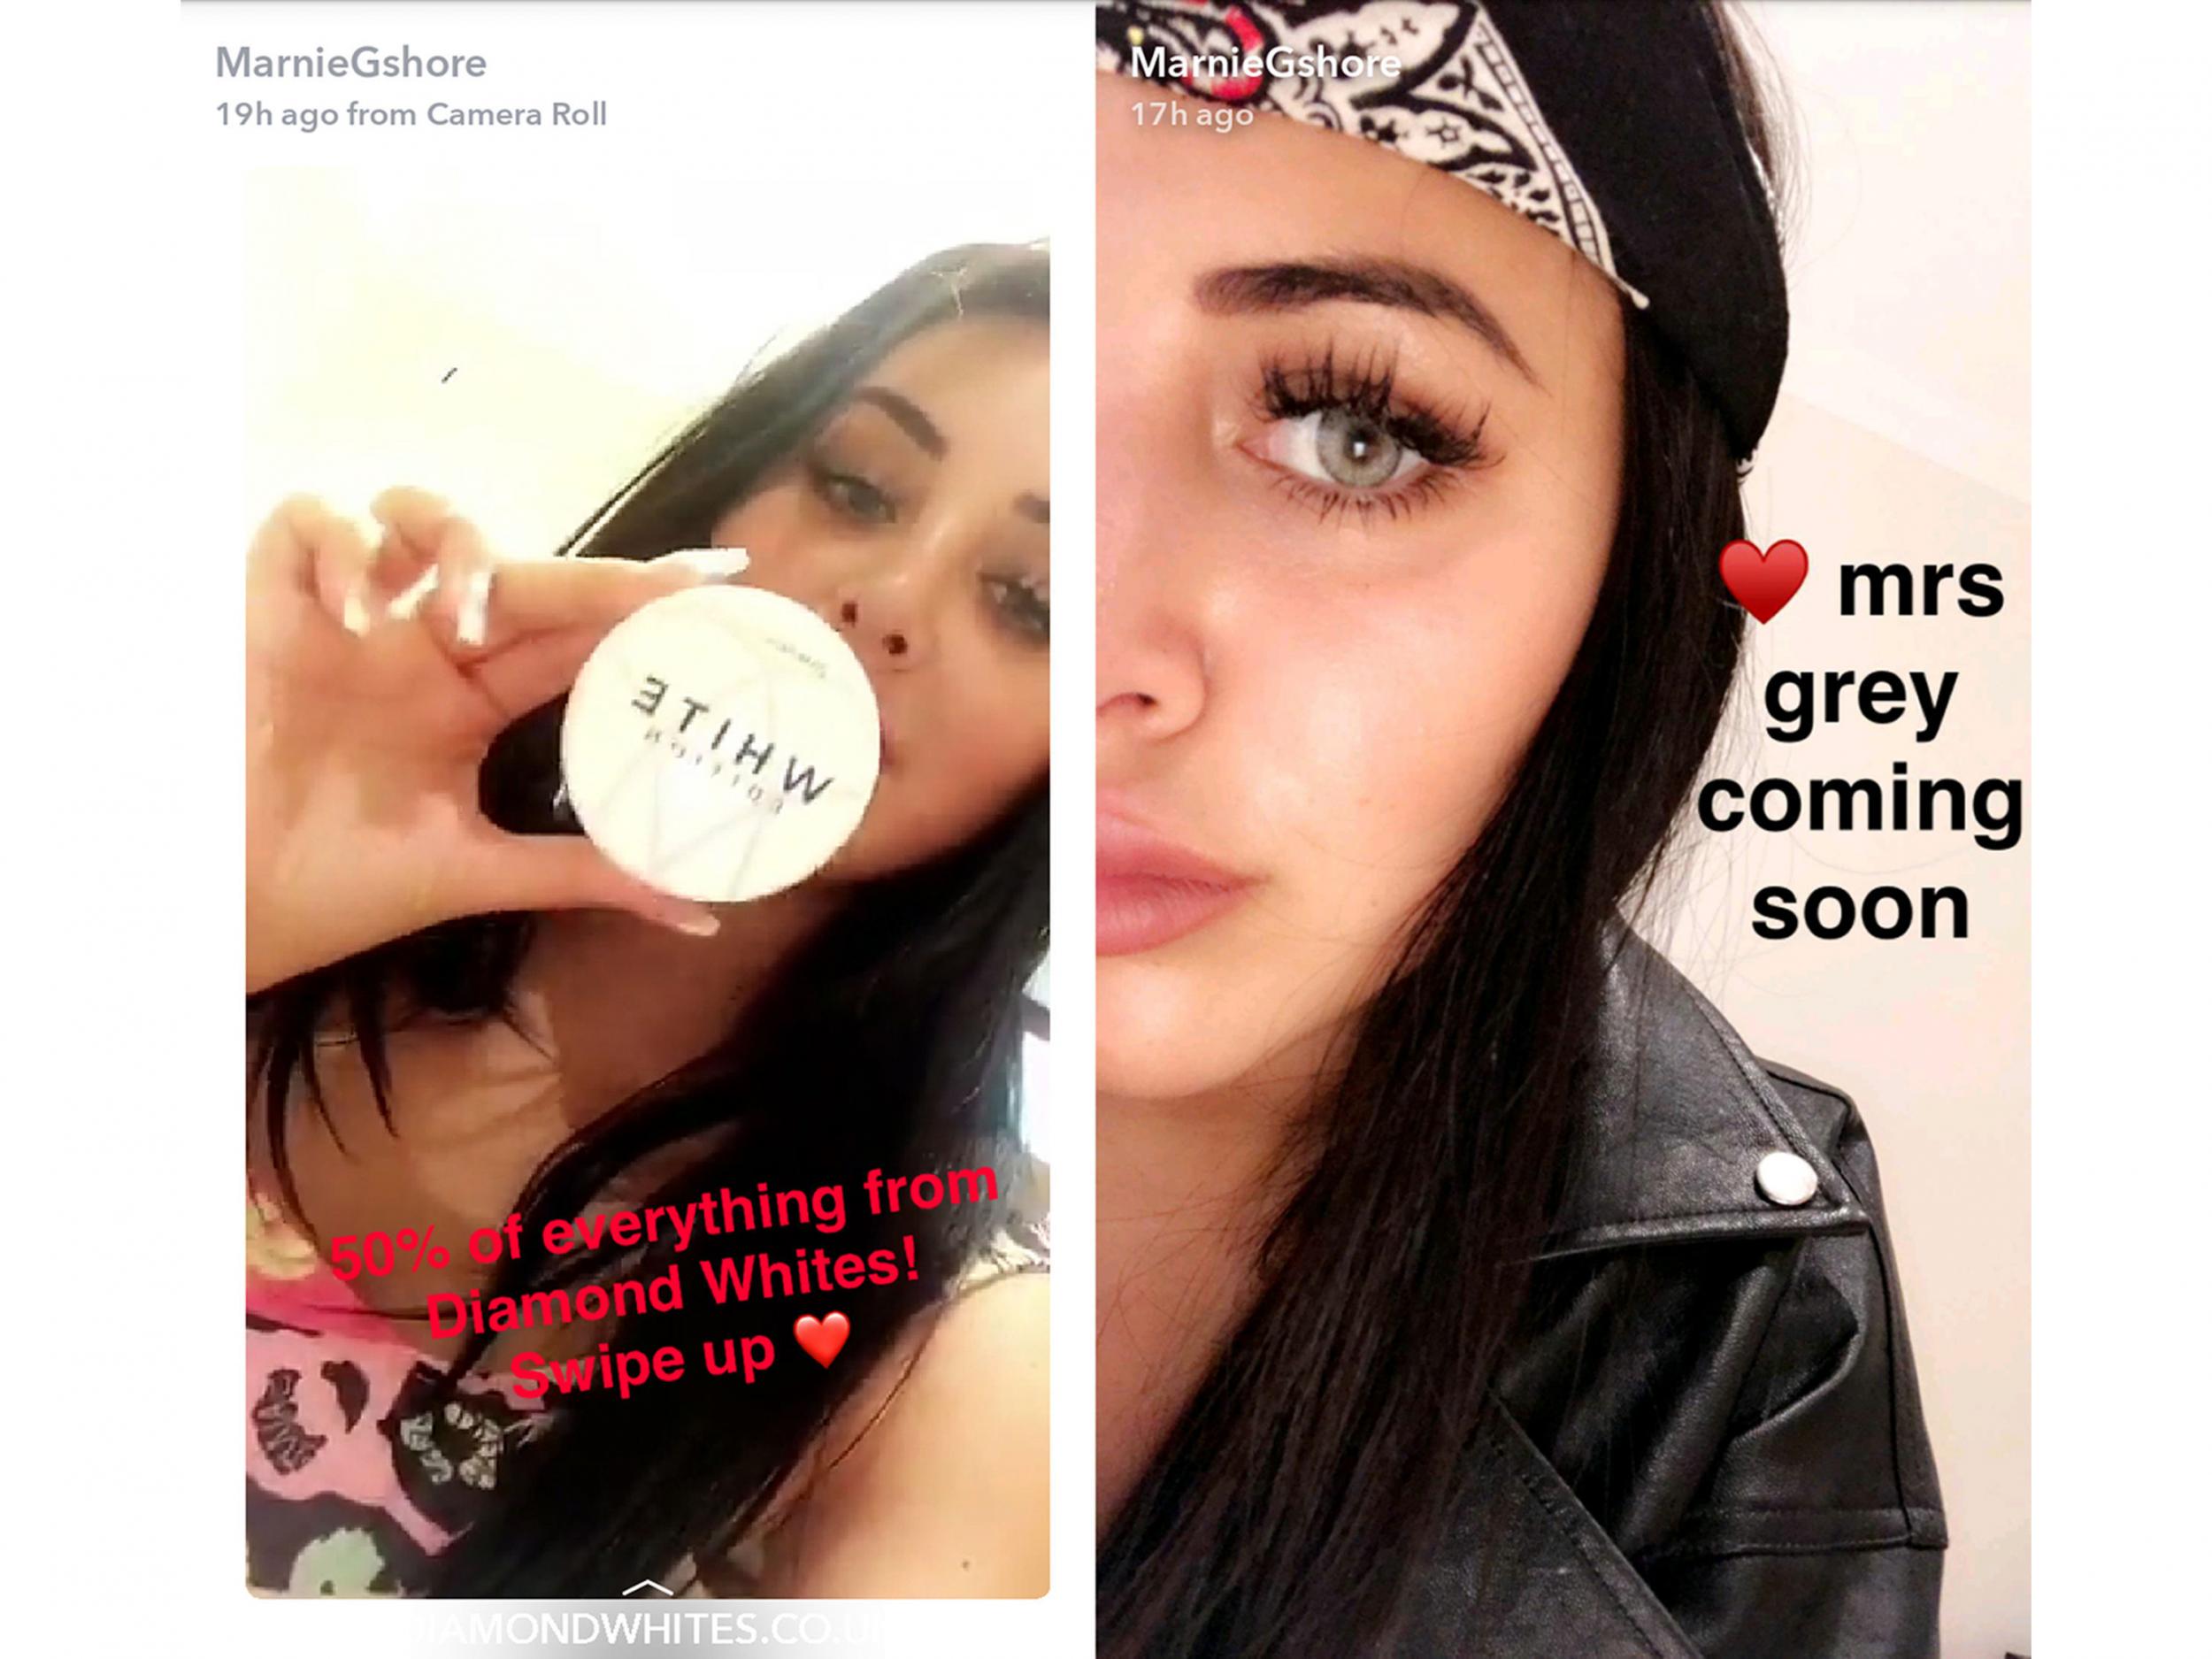 Two Snapchat posts by former Geordie Shore star Marnie Simpson have been banned for failing to clearly indicate that they were ads